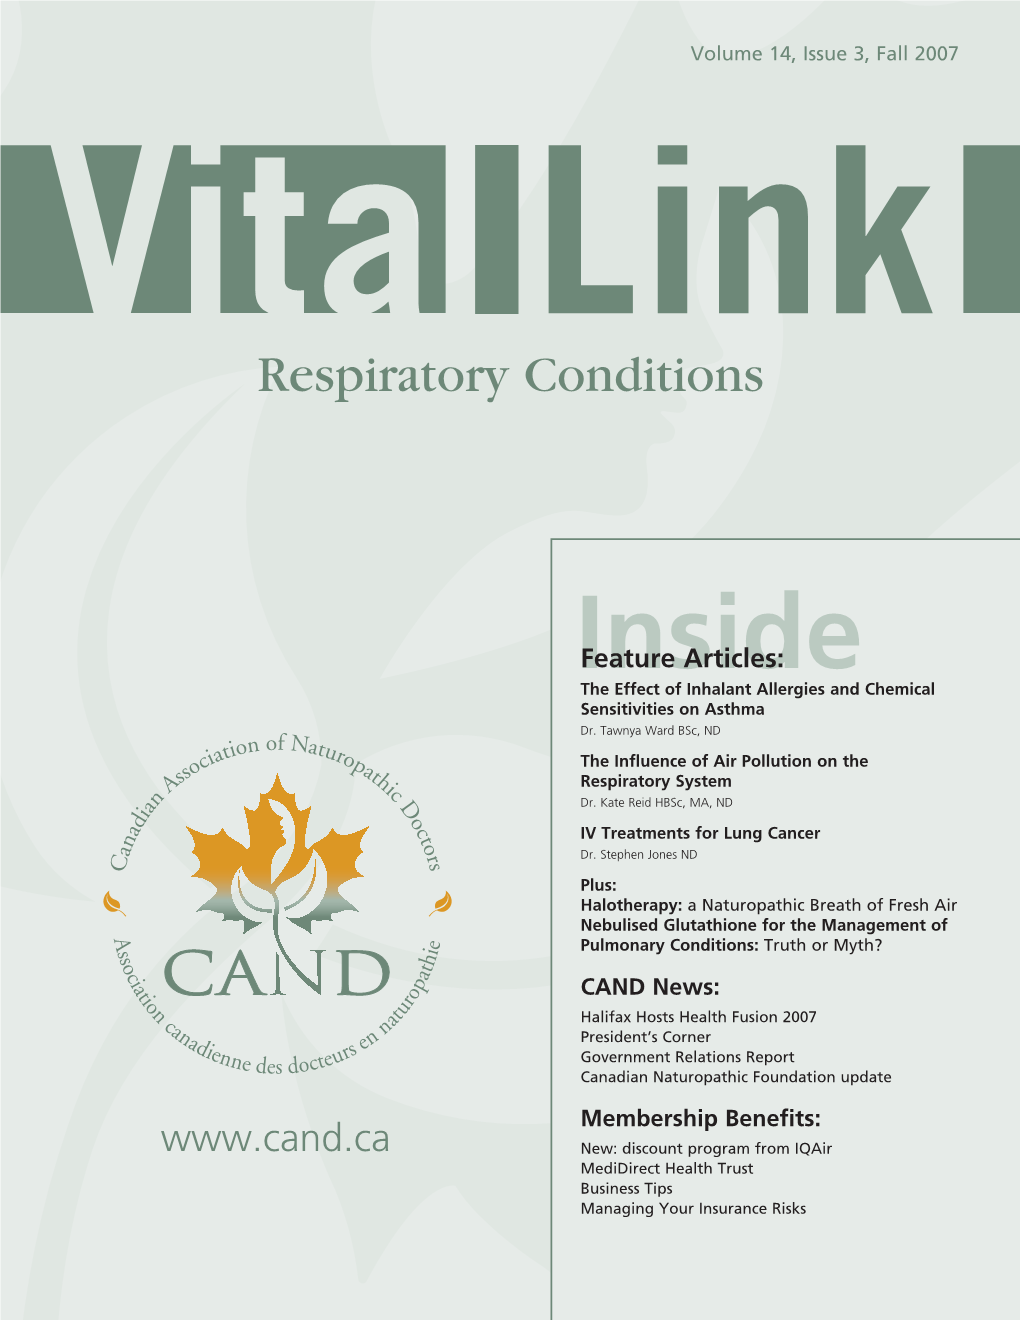 Insidefeature Articles: the Effect of Inhalant Allergies and Chemical Sensitivities on Asthma Dr